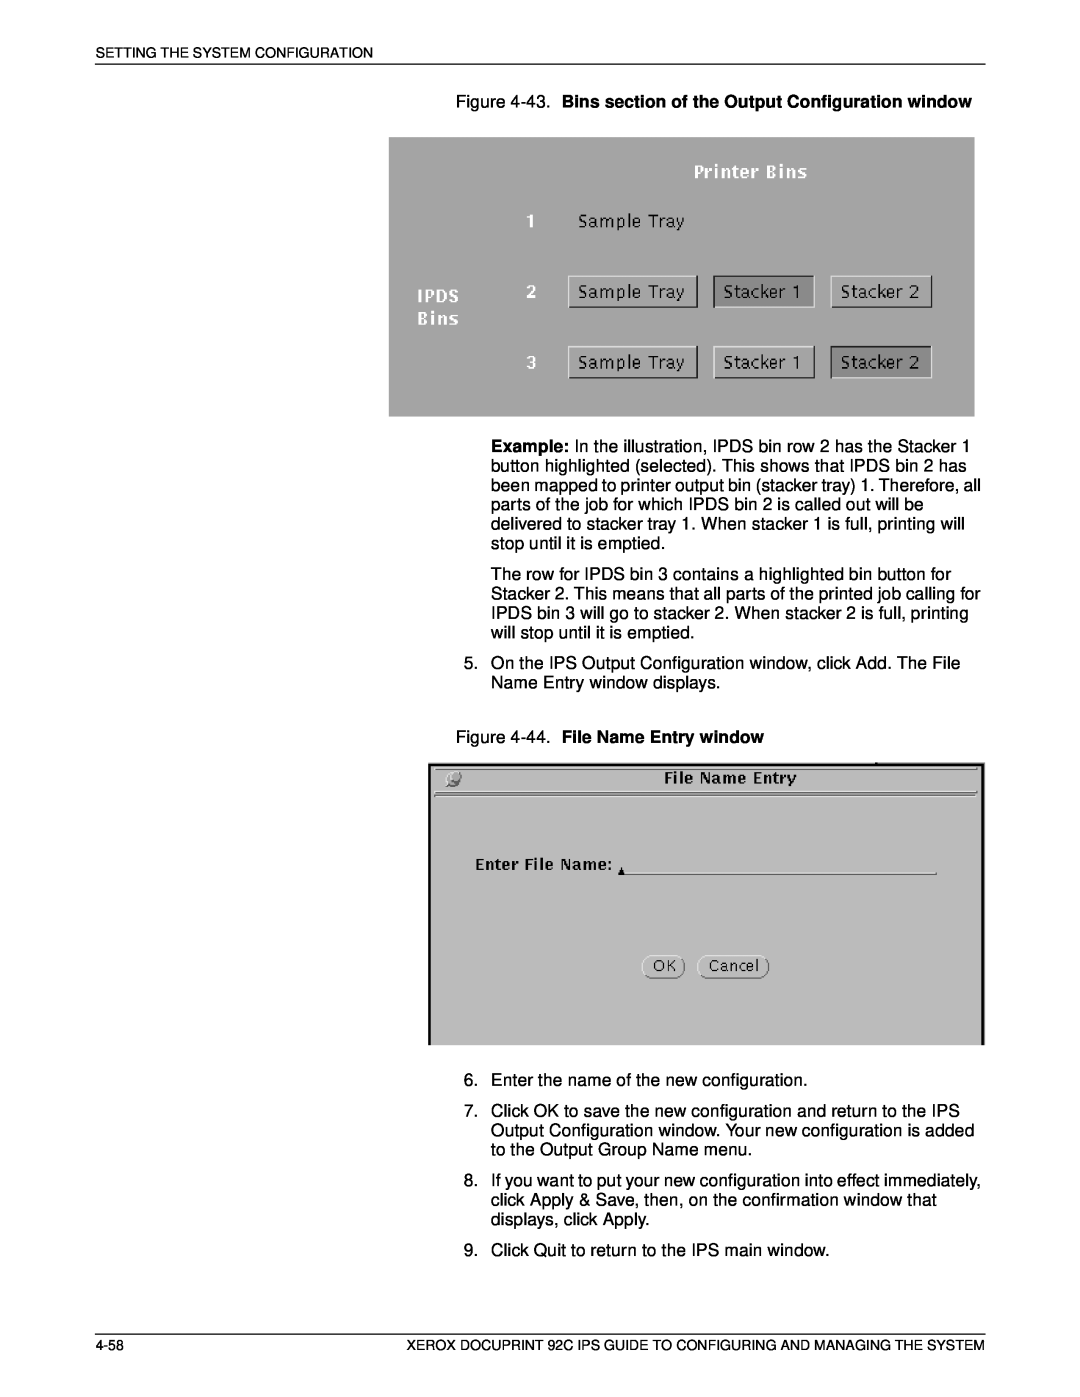 Xerox 92C IPS manual 43. Bins section of the Output Configuration window, 44. File Name Entry window 